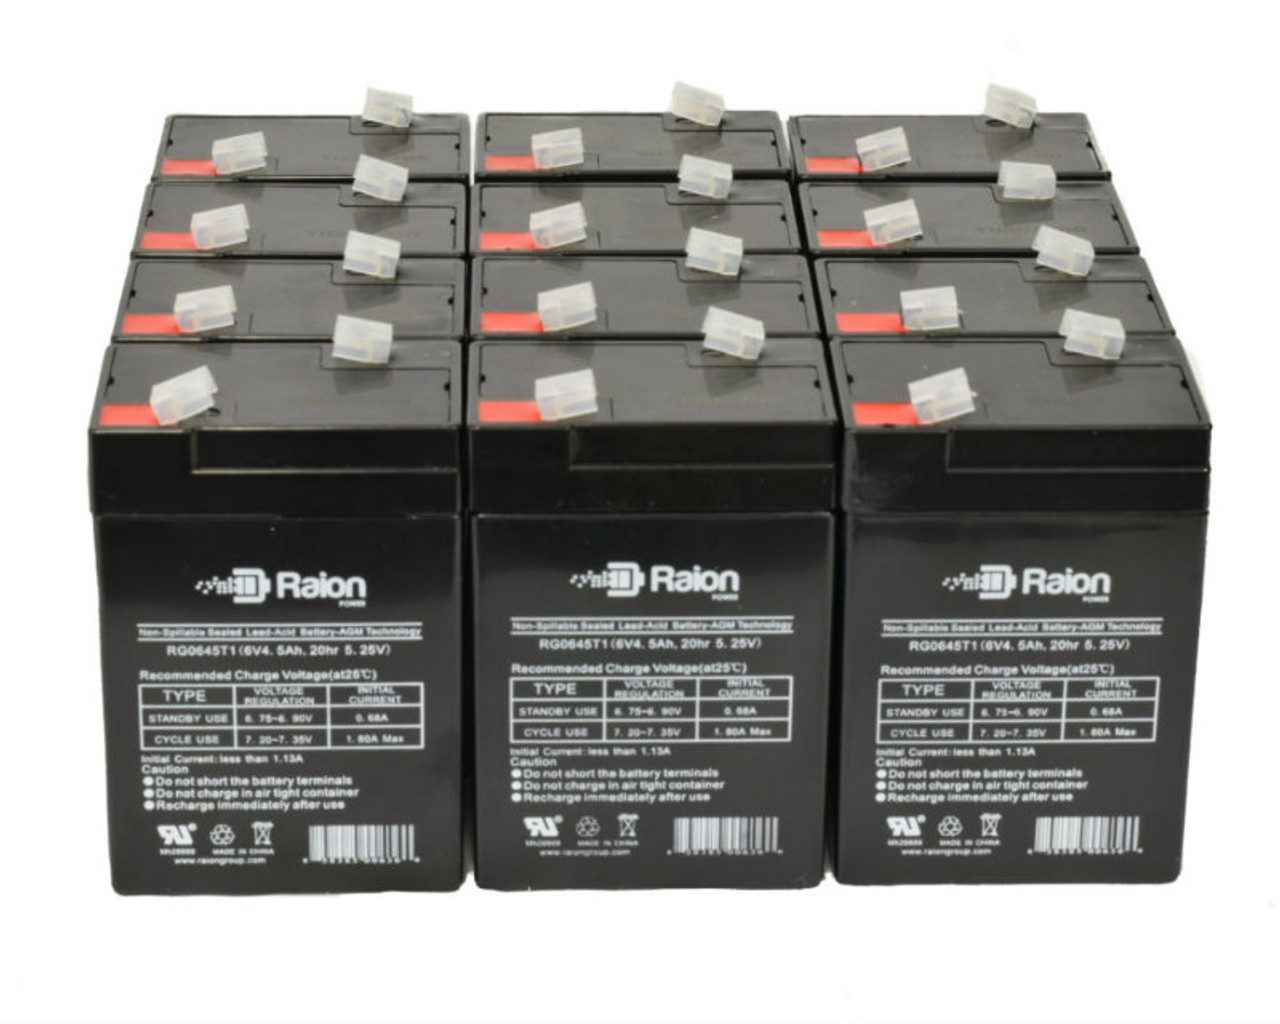 Raion Power 6 Volt 4.5Ah RG0645T1 Replacement Battery for Liven LV4.5-6 - 12 Pack